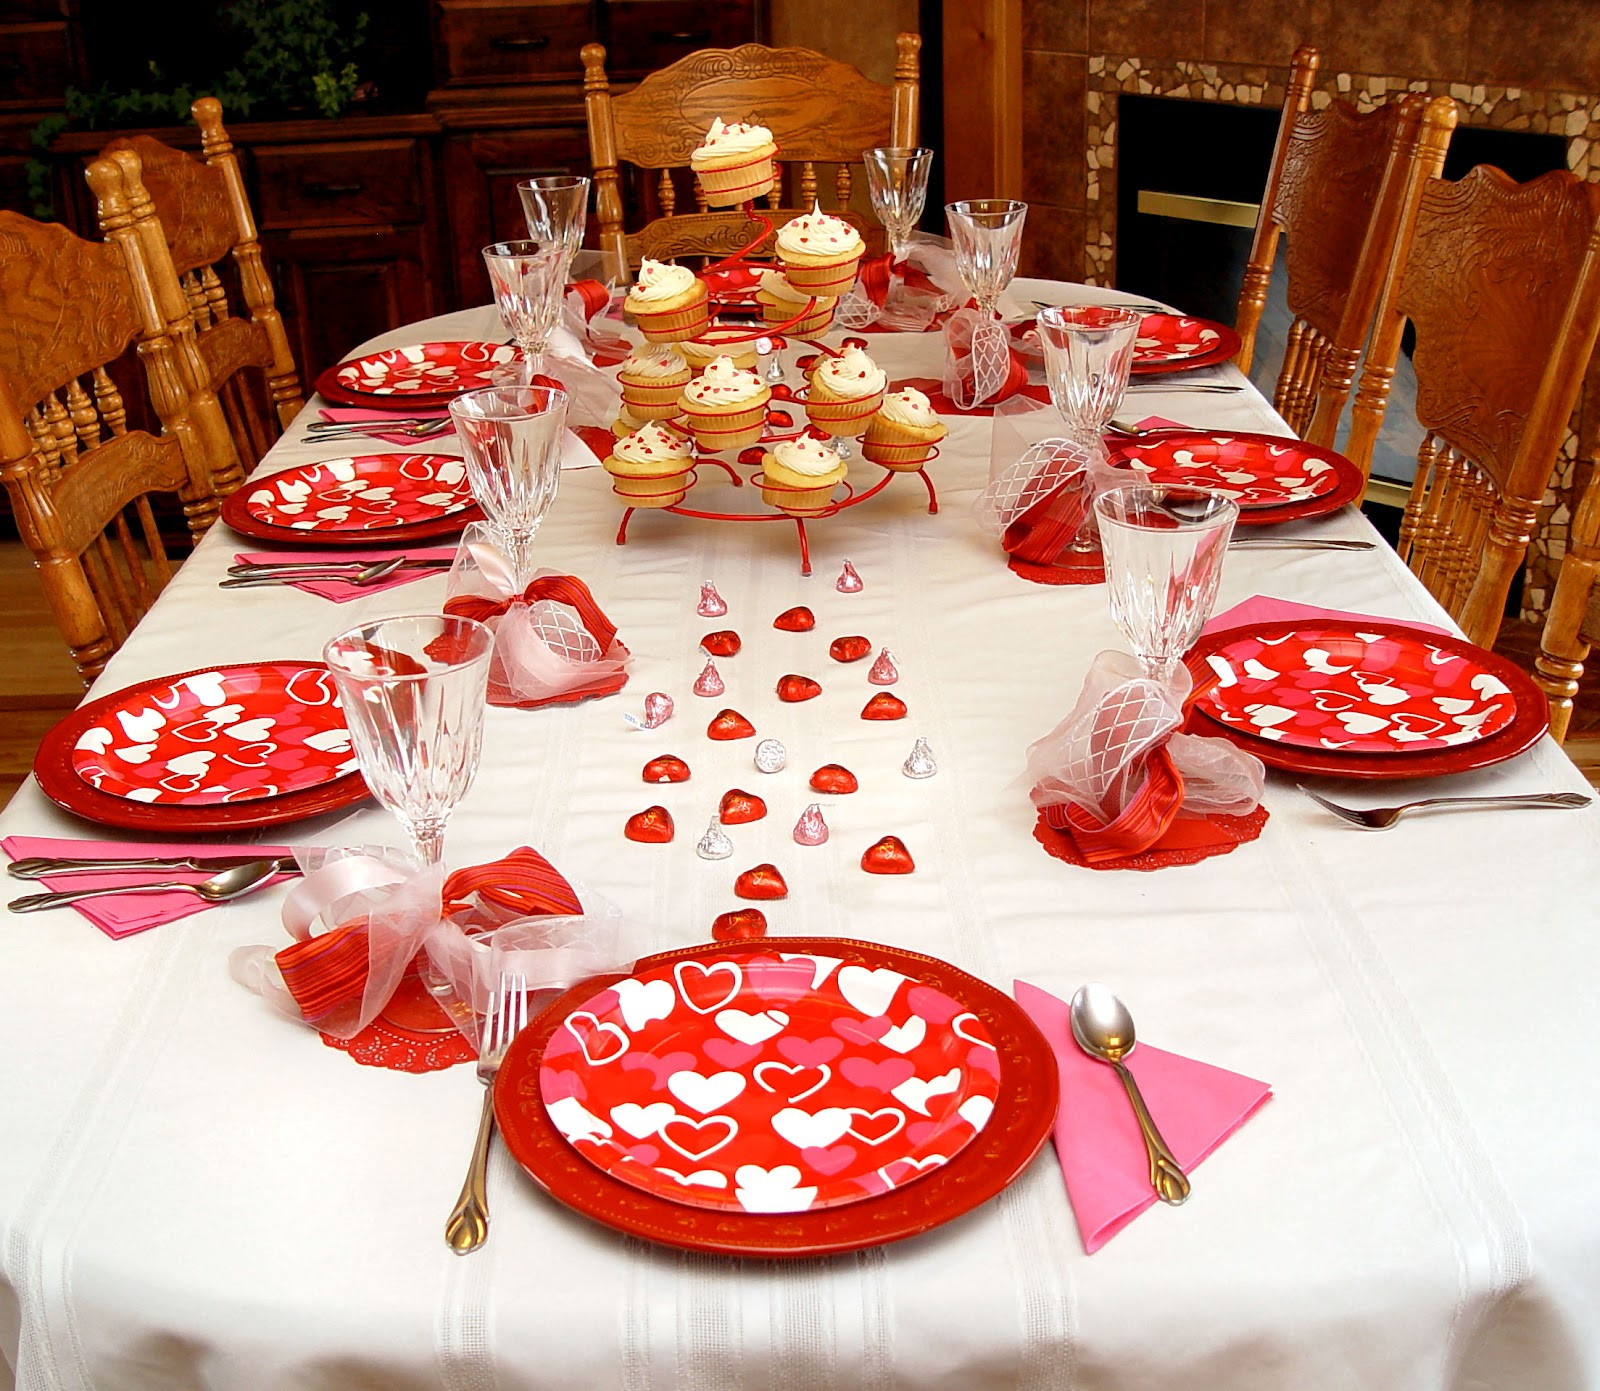 Valentines Dinner Party Ideas
 Family Valentines Dinner Idea and How To Make A Junk Bow